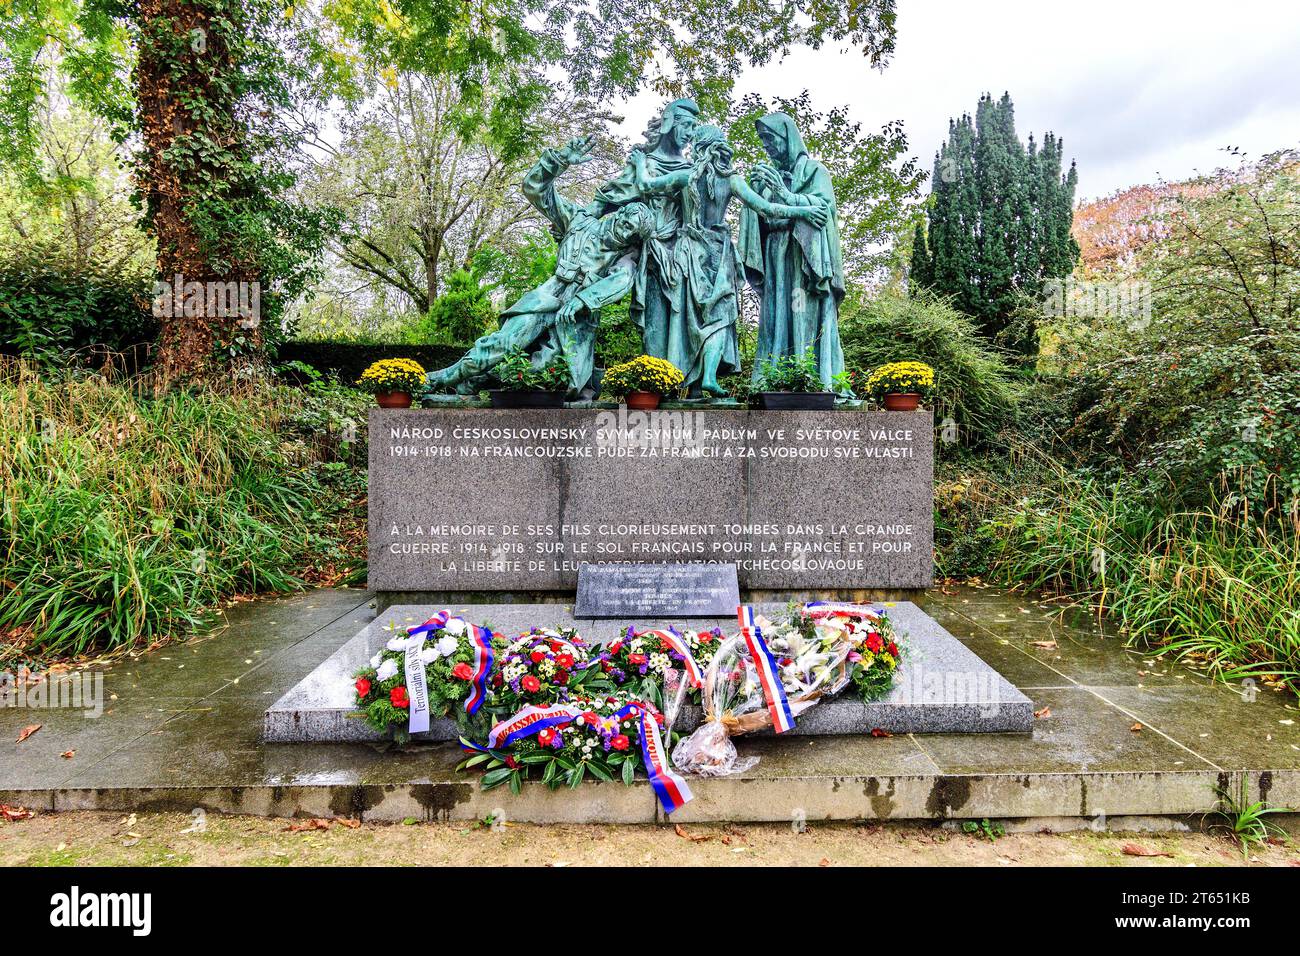 Monument to Czechoslovak soldiers killed during WW1, in the Père Lachaise cemetery, Paris 20, France. Stock Photo